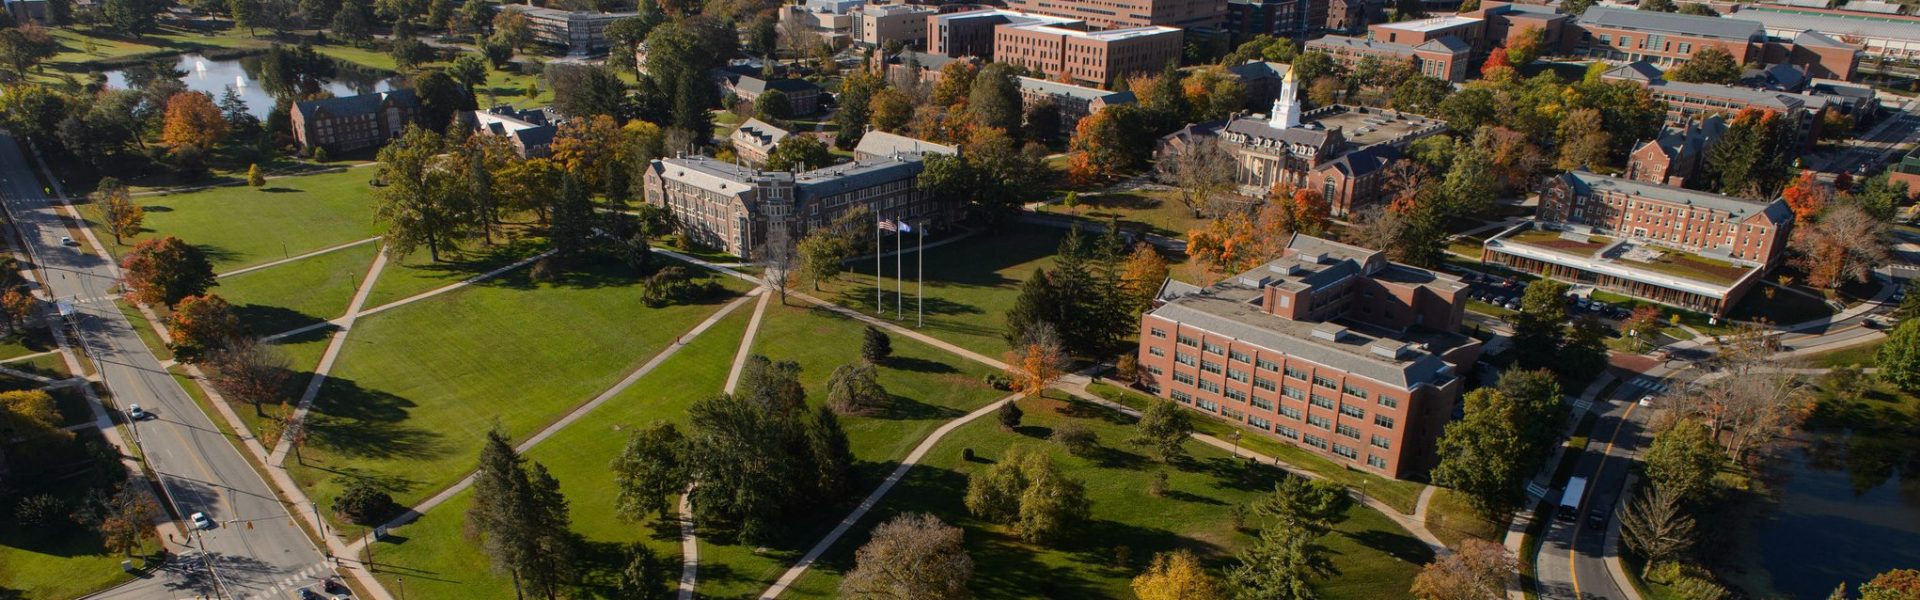 aerial view of uconn campus